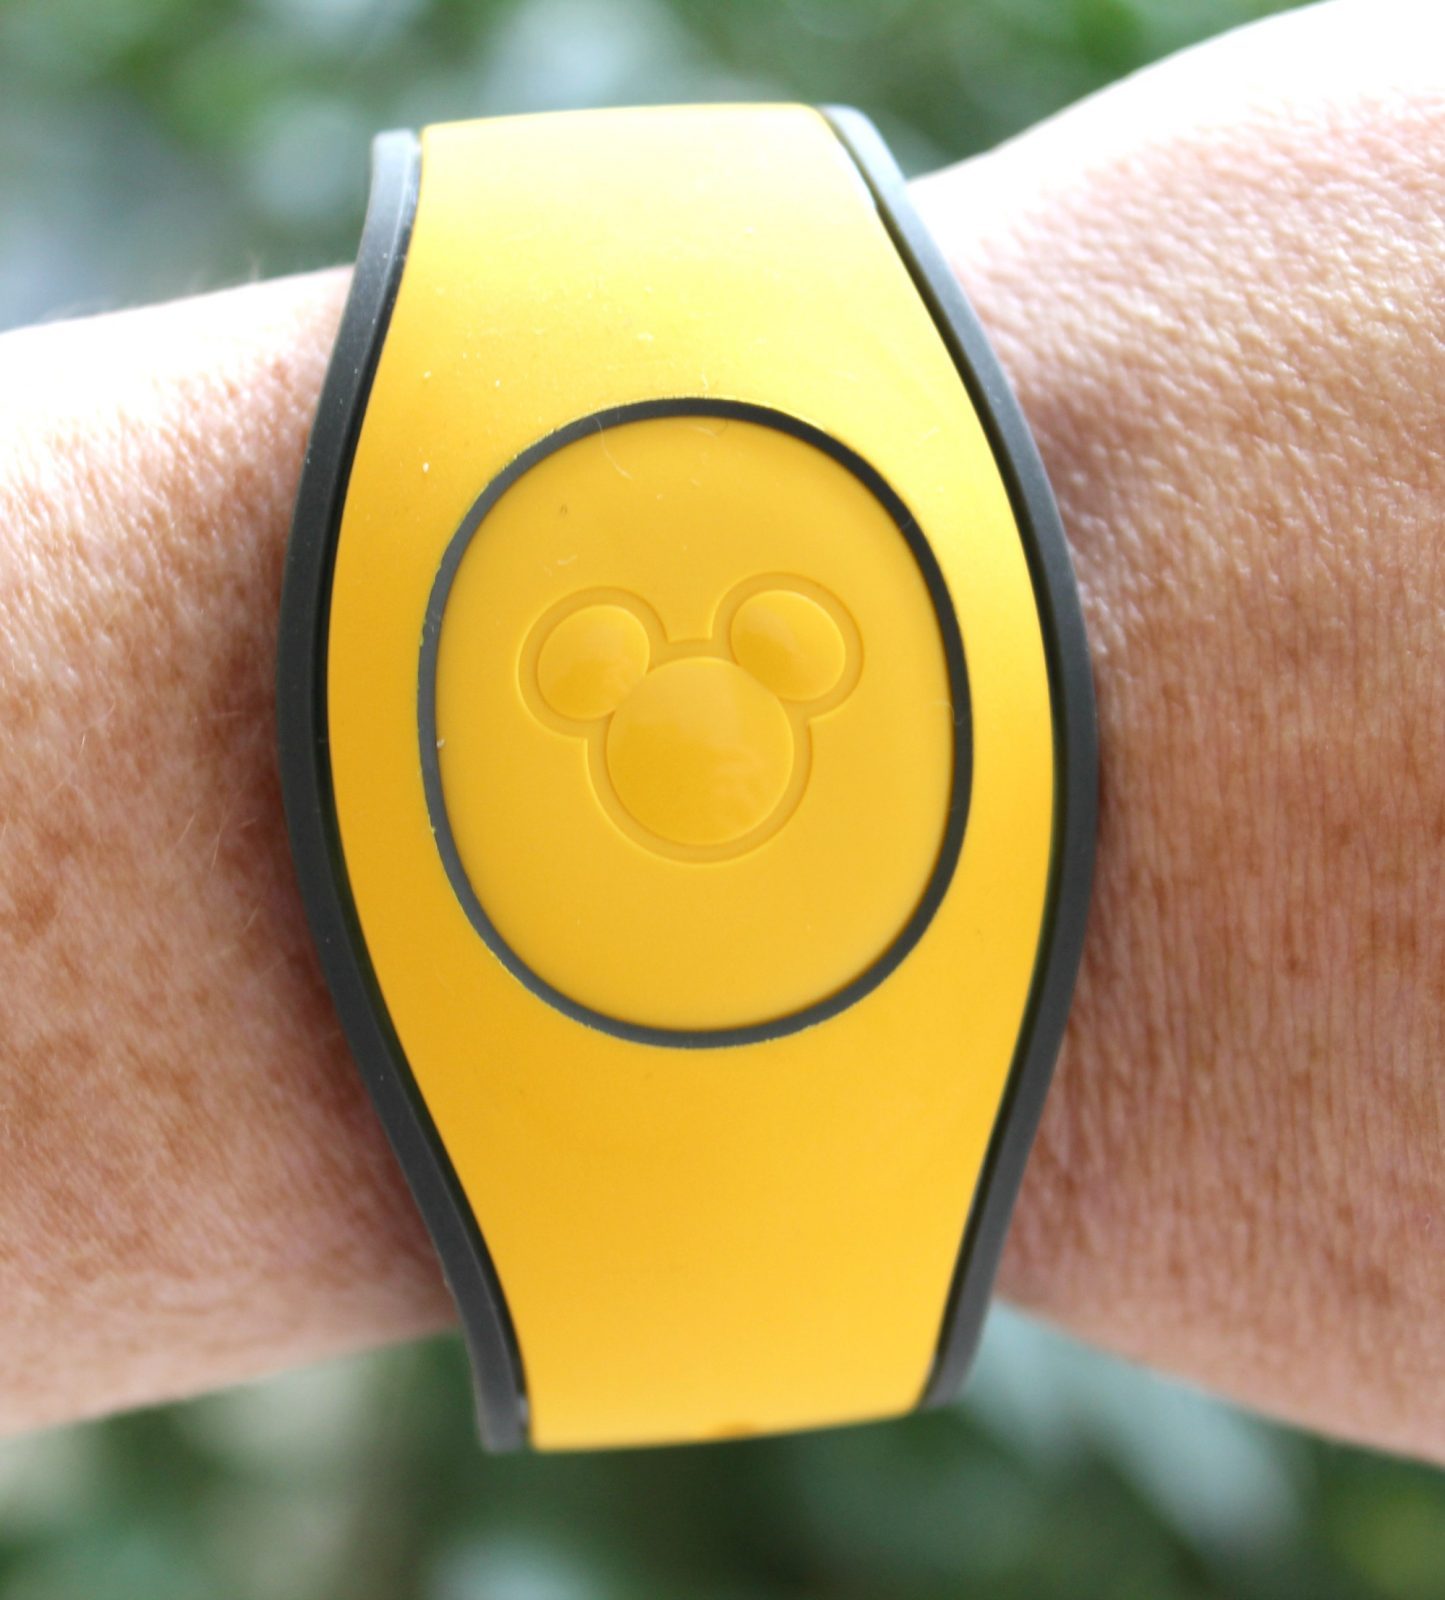 Disney Magic Band 101 Everything You Need To Know The Frugal South